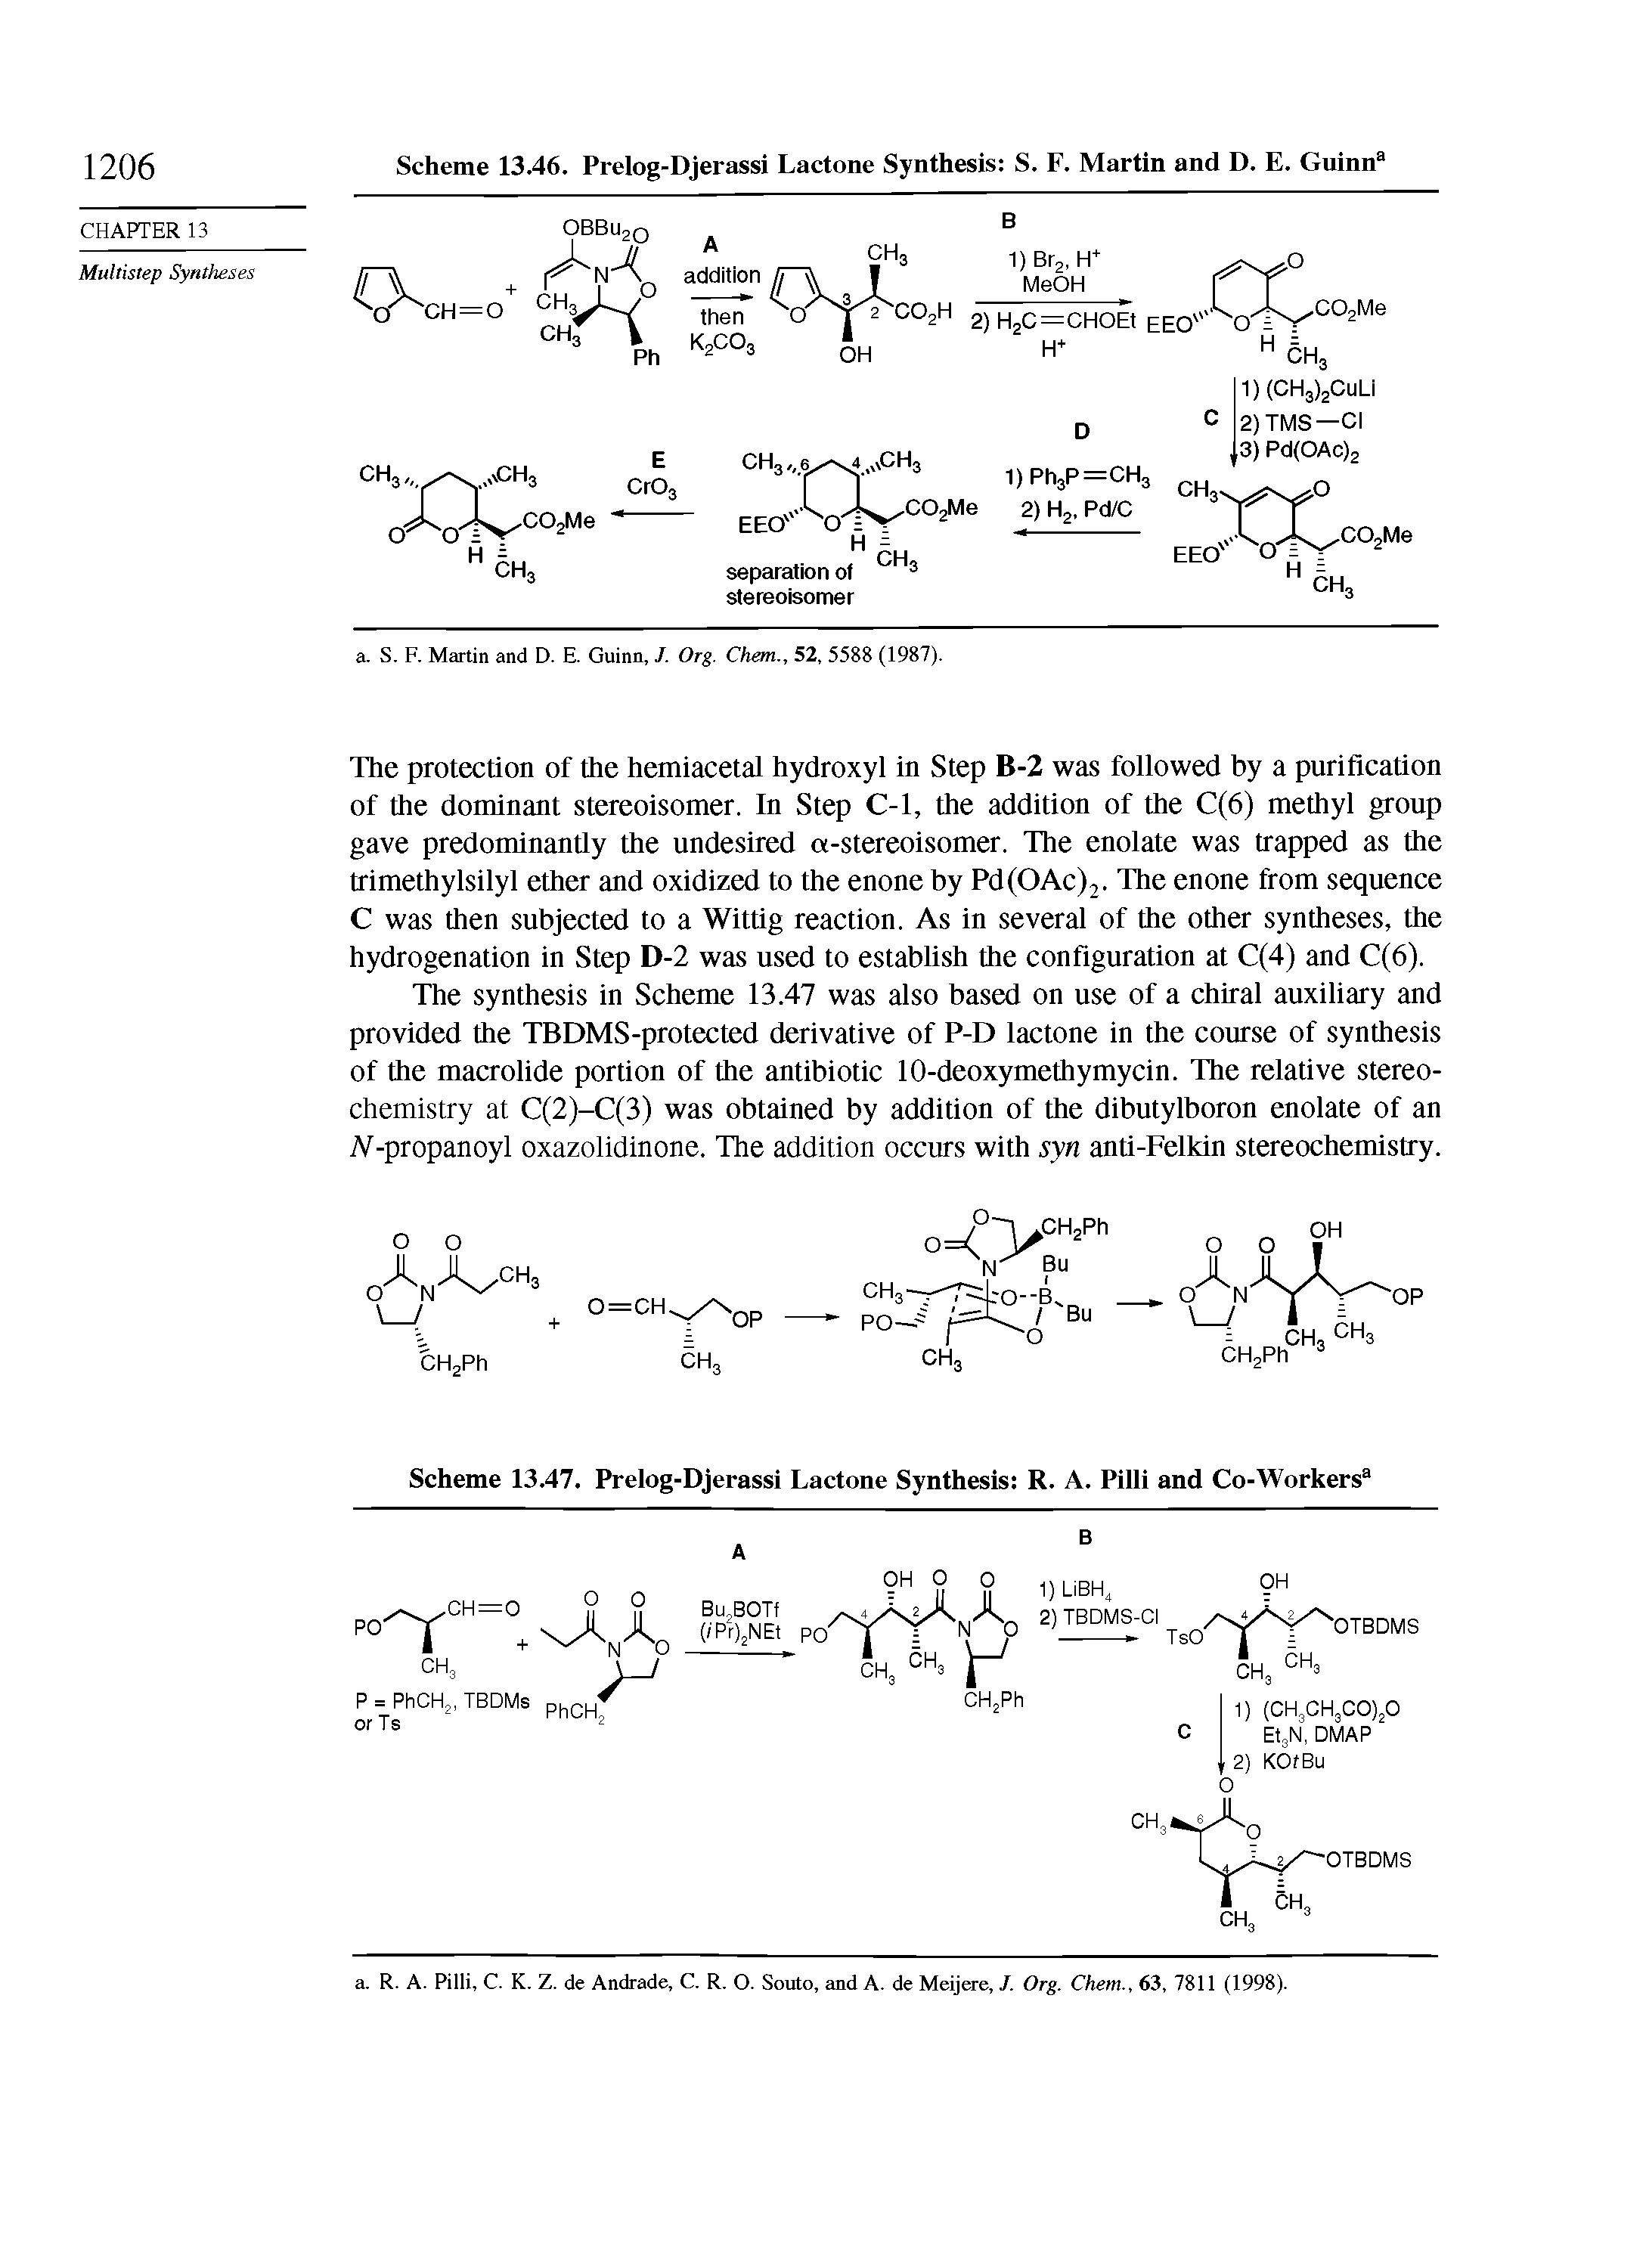 Scheme 13.47. Prelog-Djerassi Lactone Synthesis R. A. Pilli and Co-Workers3...